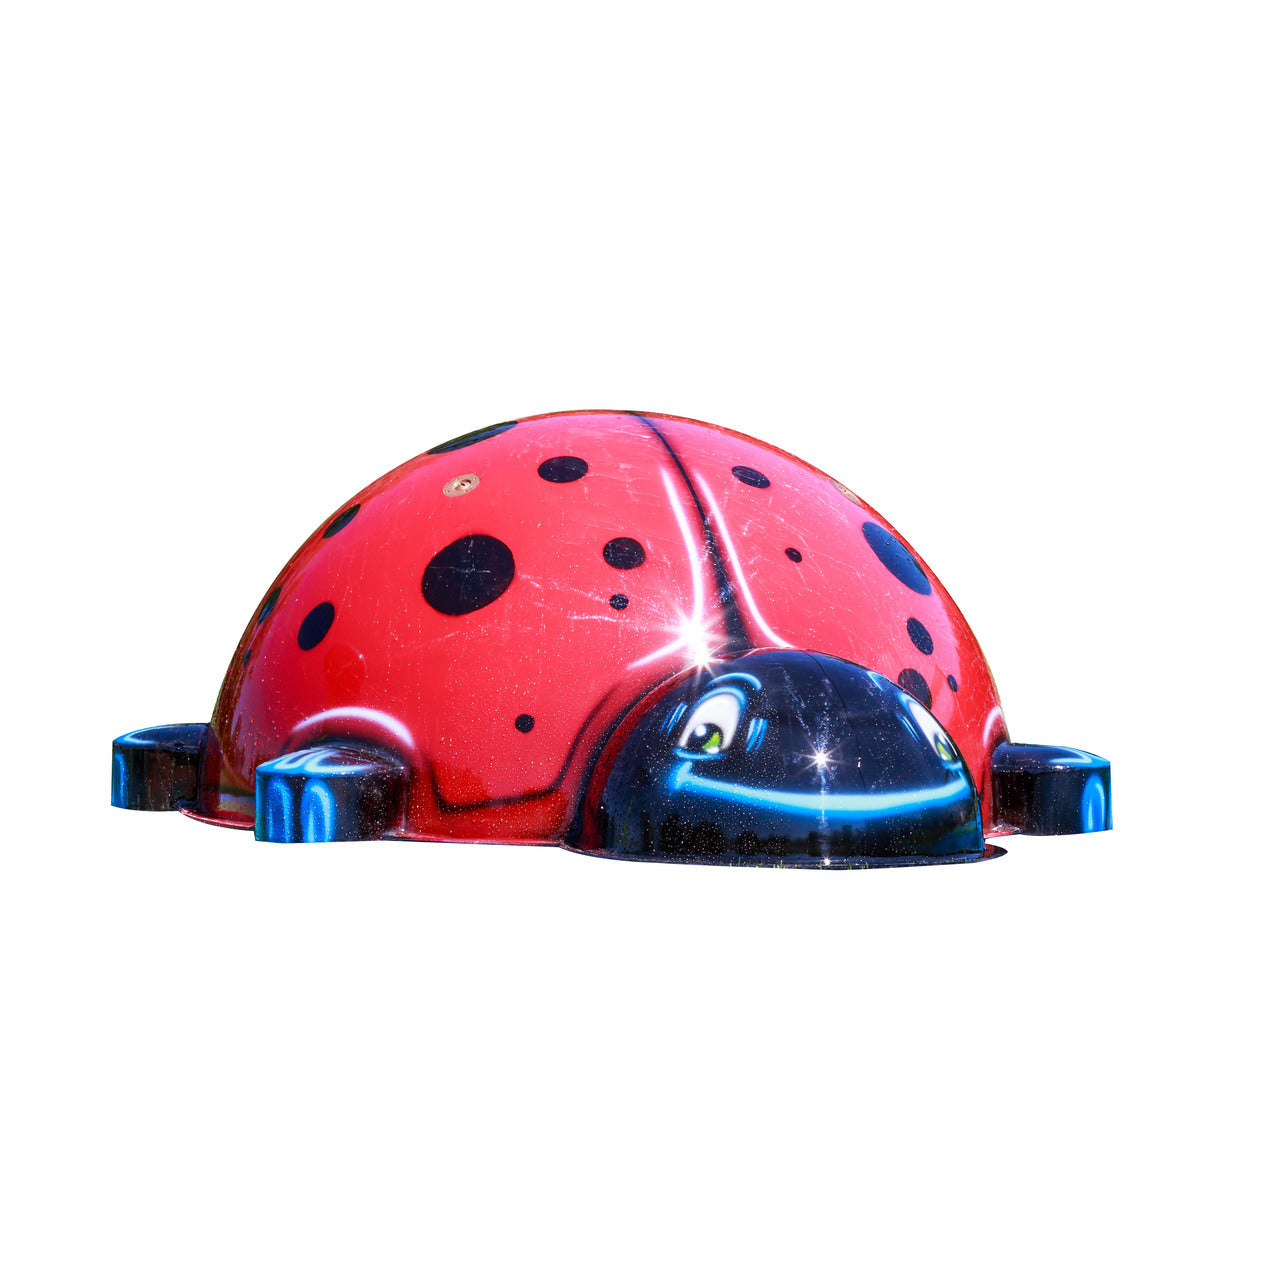 Large Ladybug Mobile Spray and Play Features